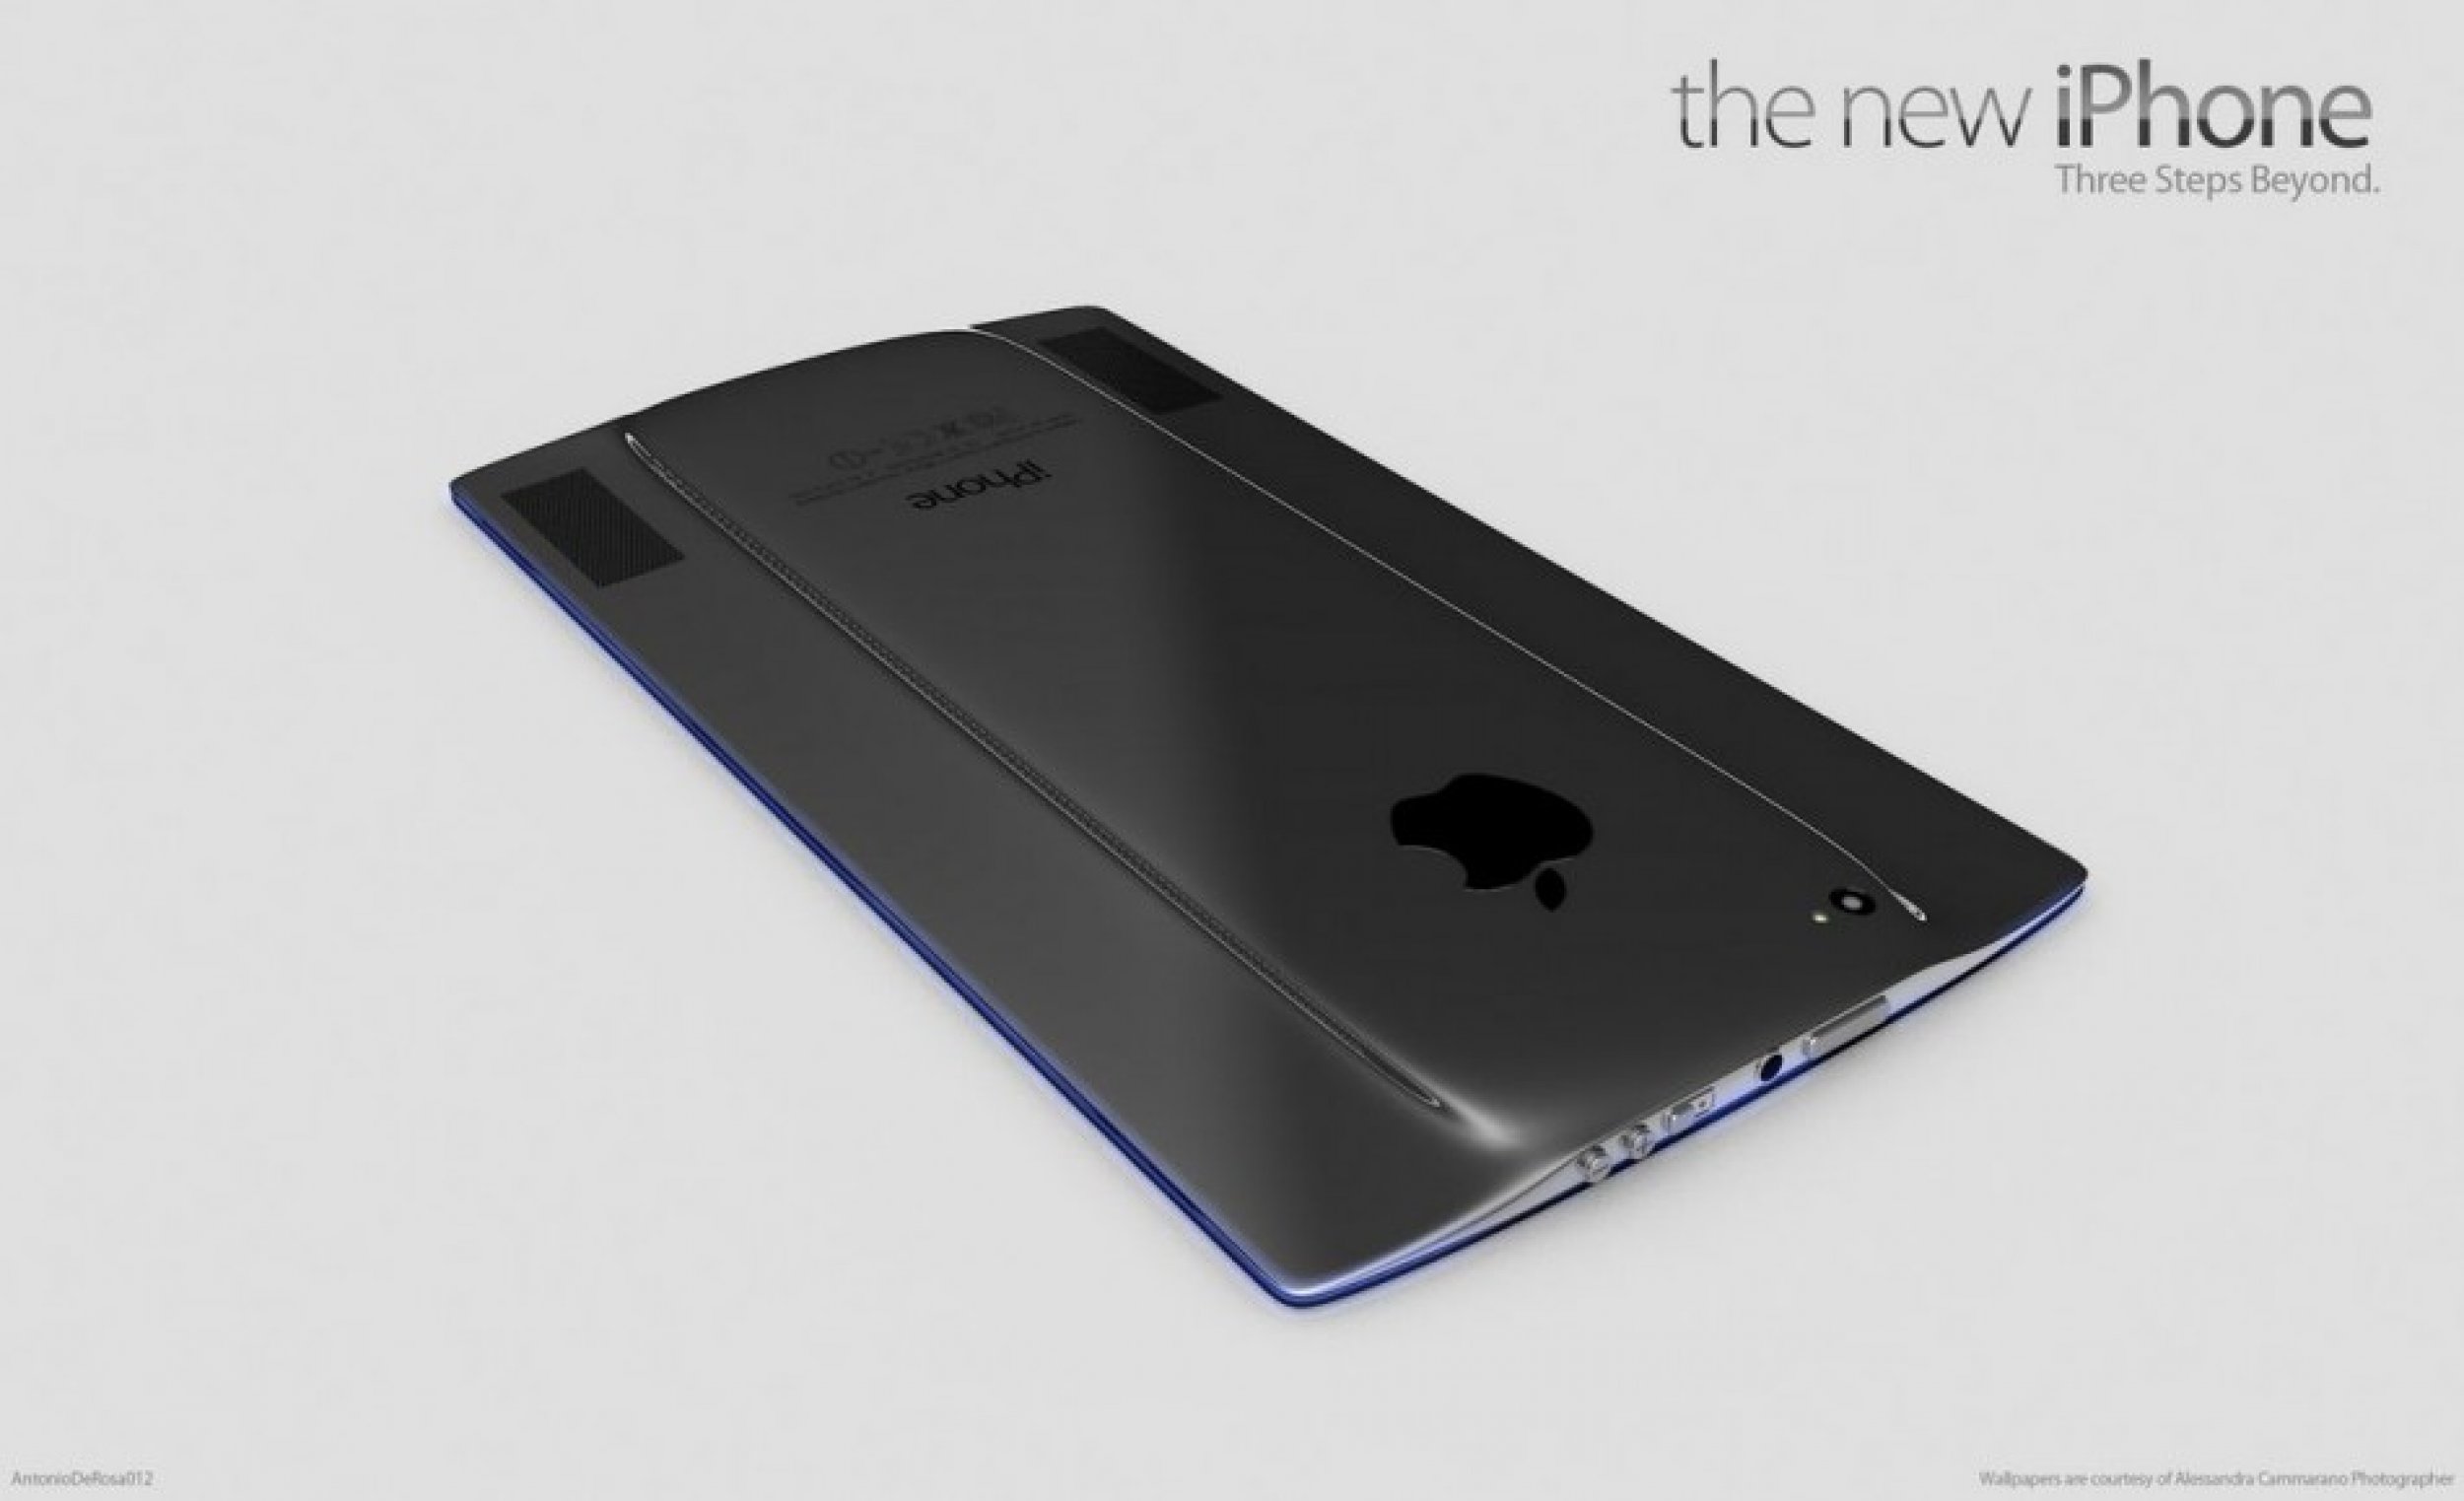 A Stunning New Concept of the Next iPhone